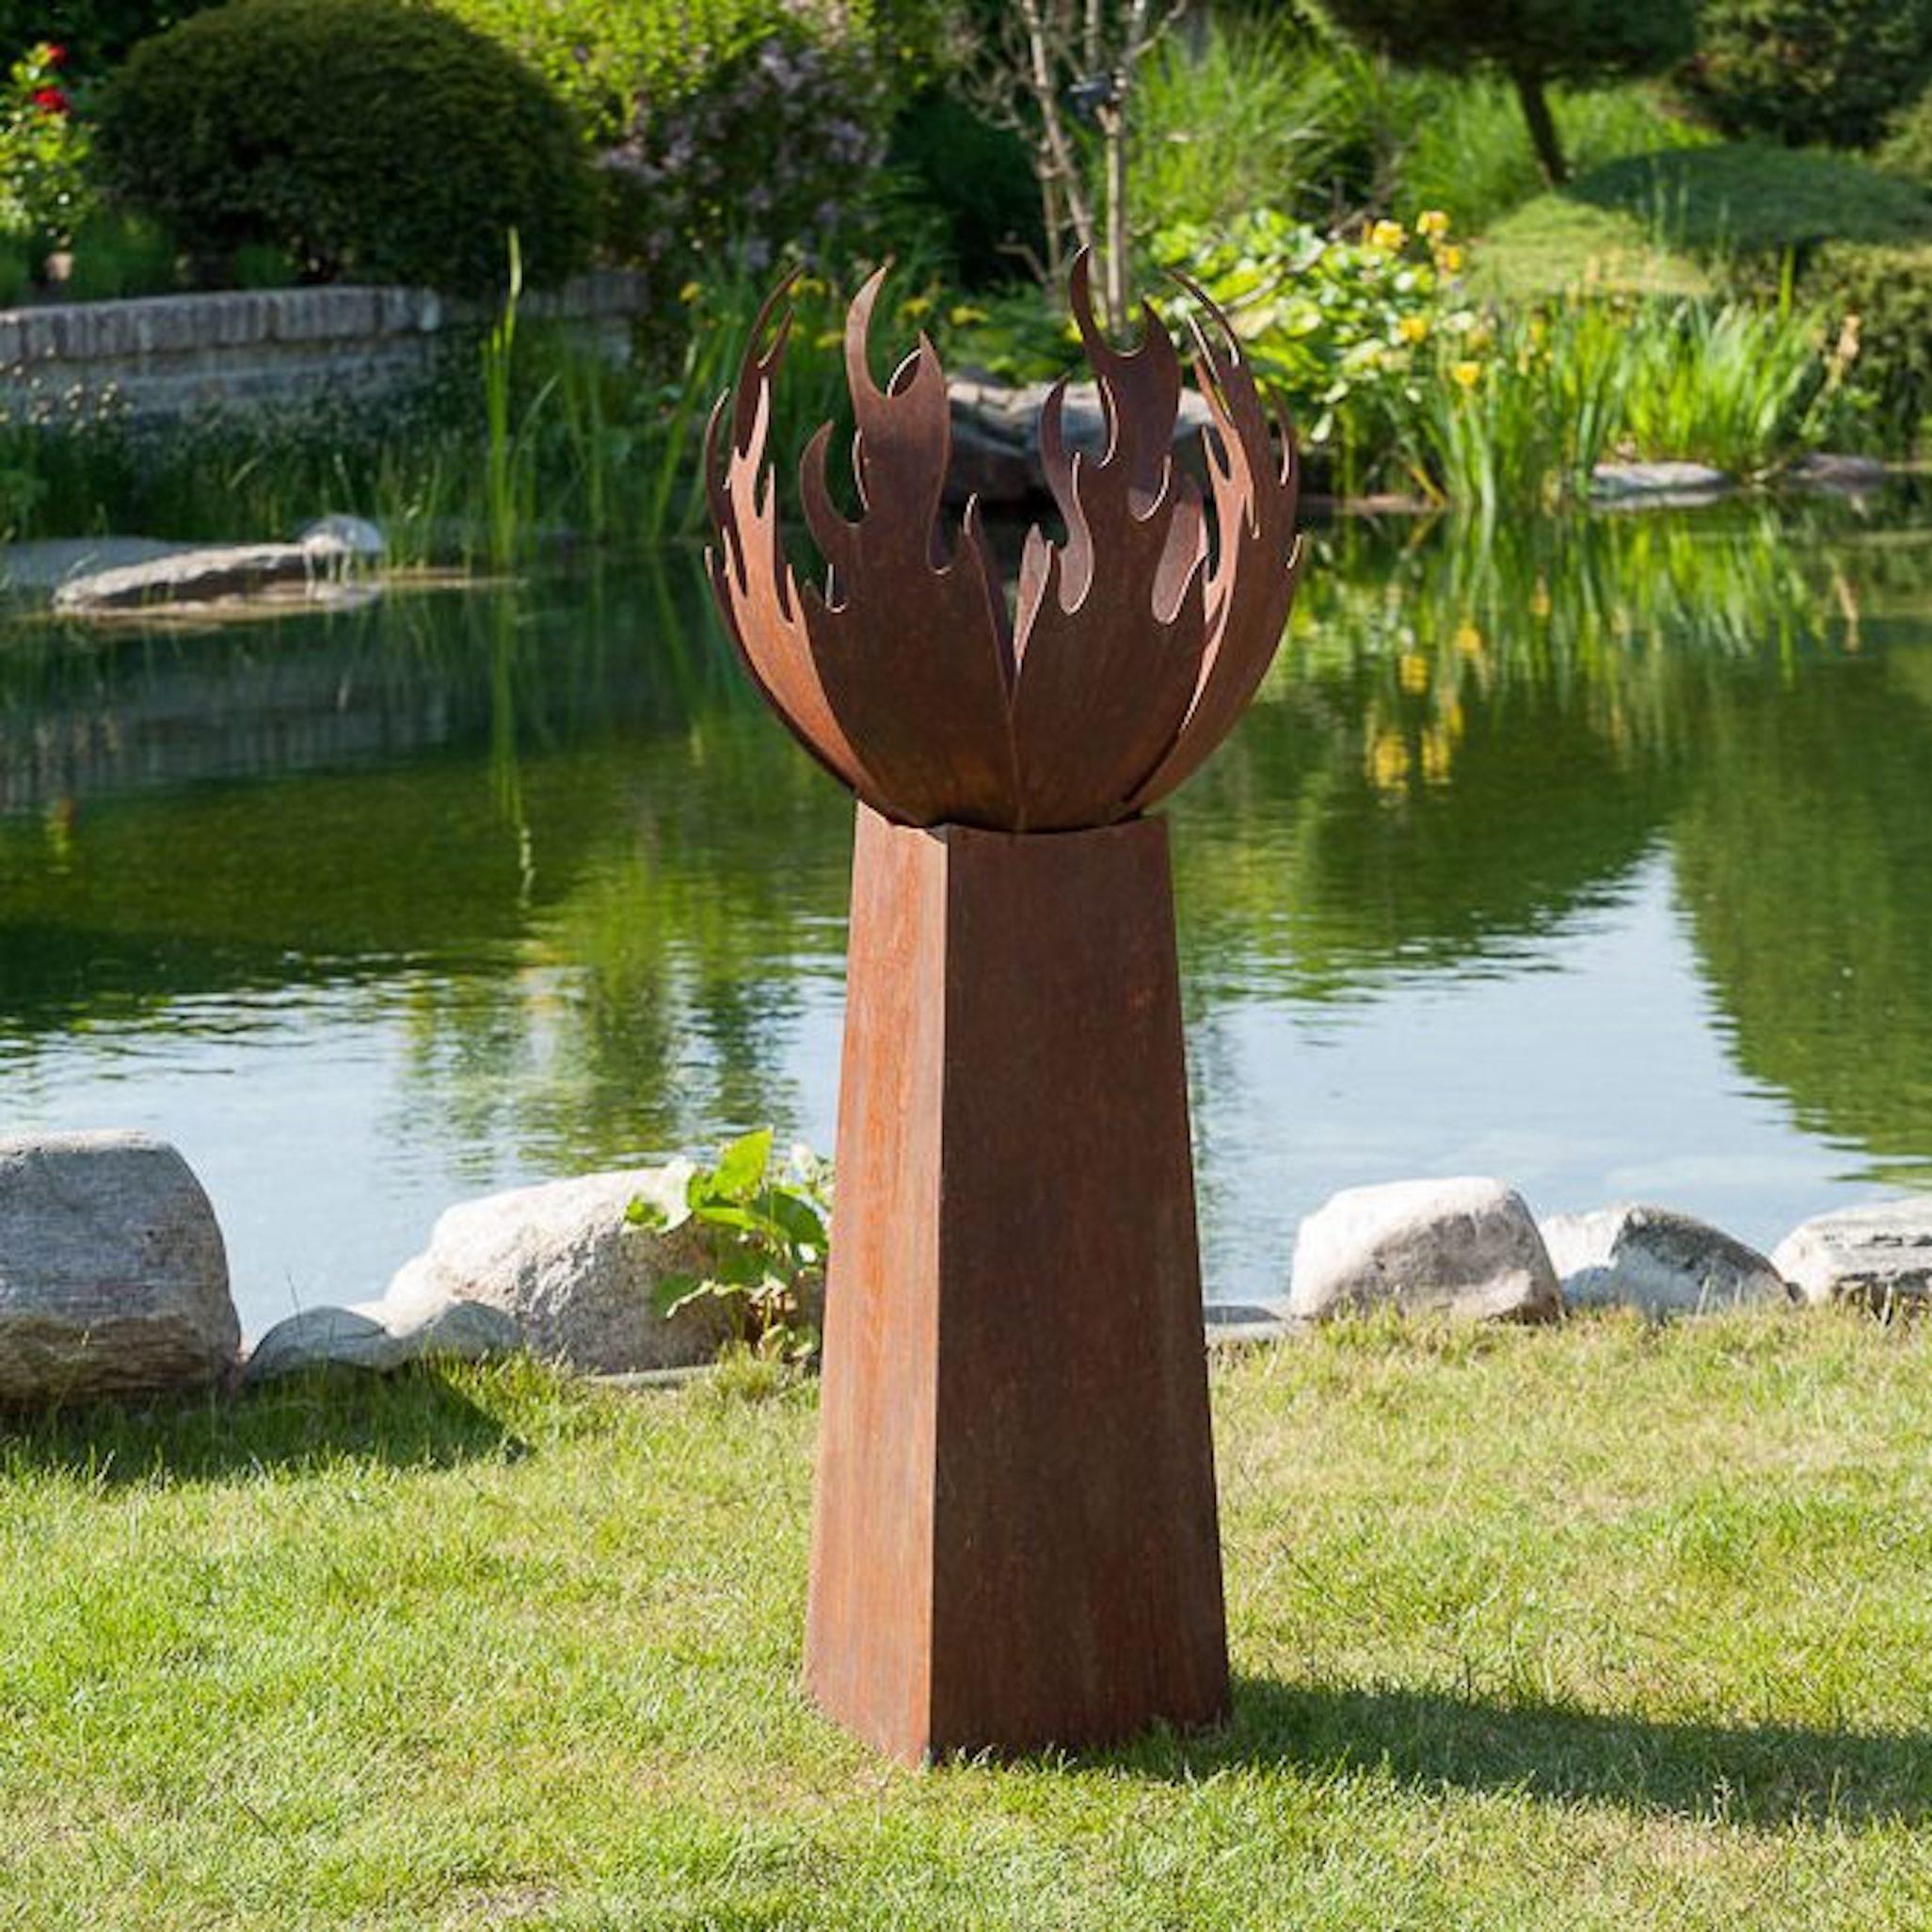 Outdoor Fire Pit - "Flame" with angled pedestal - medium height - Art by Stefan Traloc